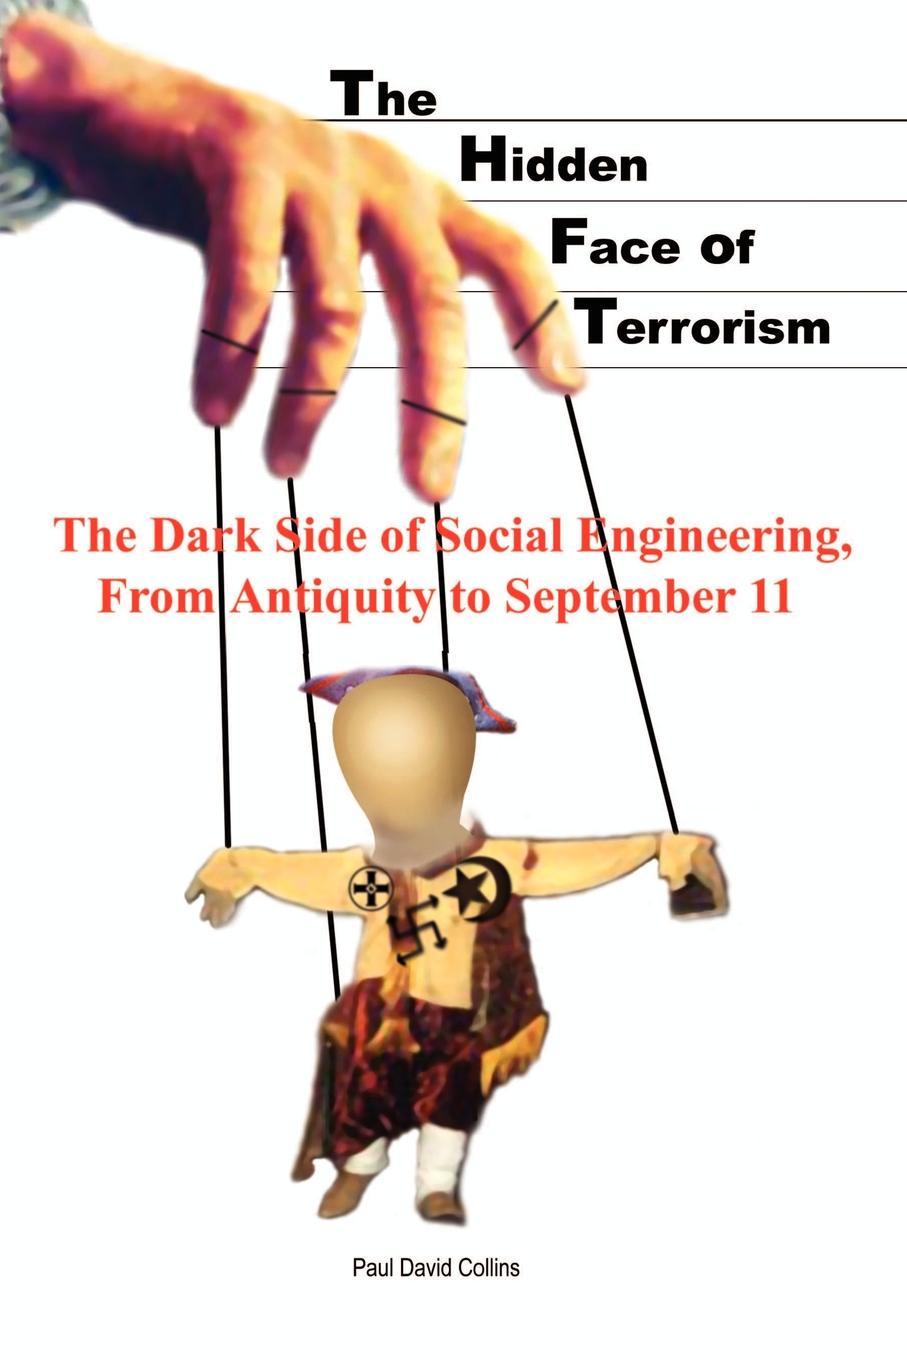 The Hidden Face of Terrorism. The Dark Side of Social Engineering, from Antiquity to September 11